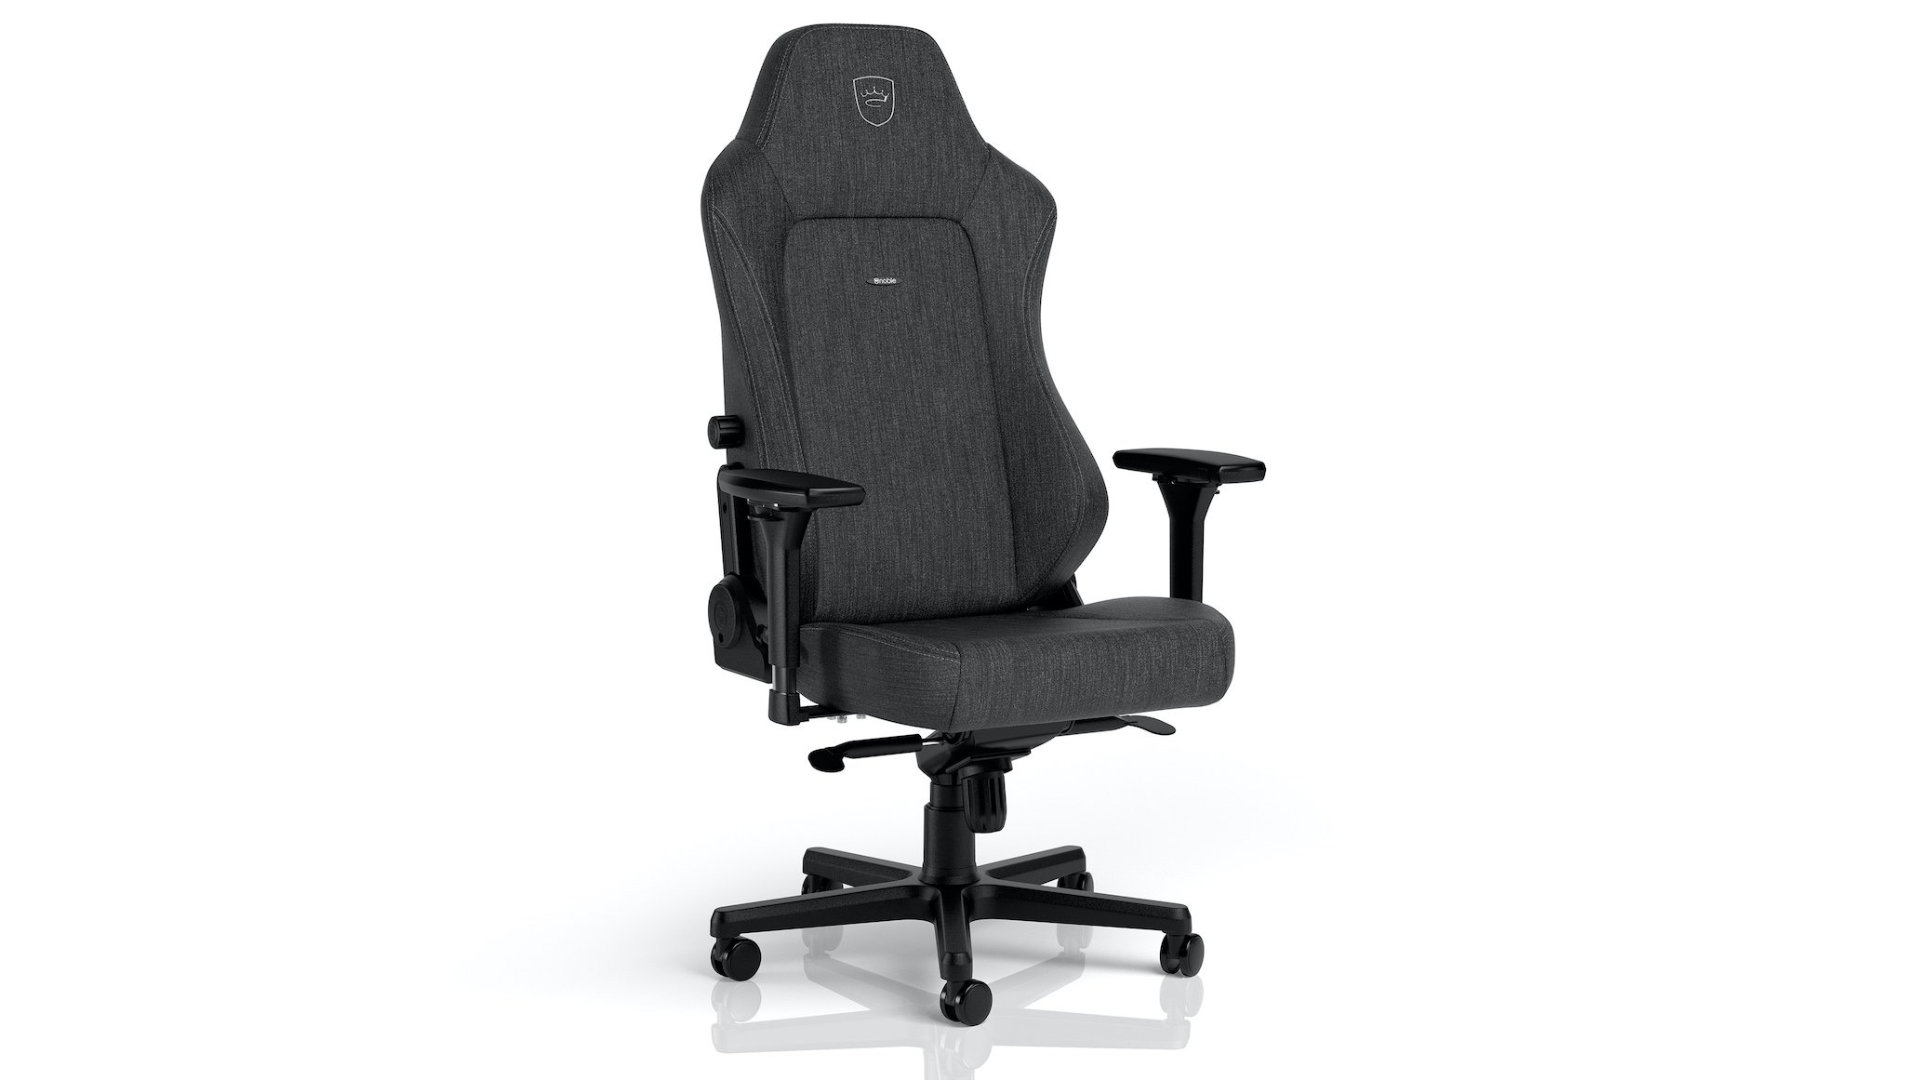 Noblechairs Epic TX Review